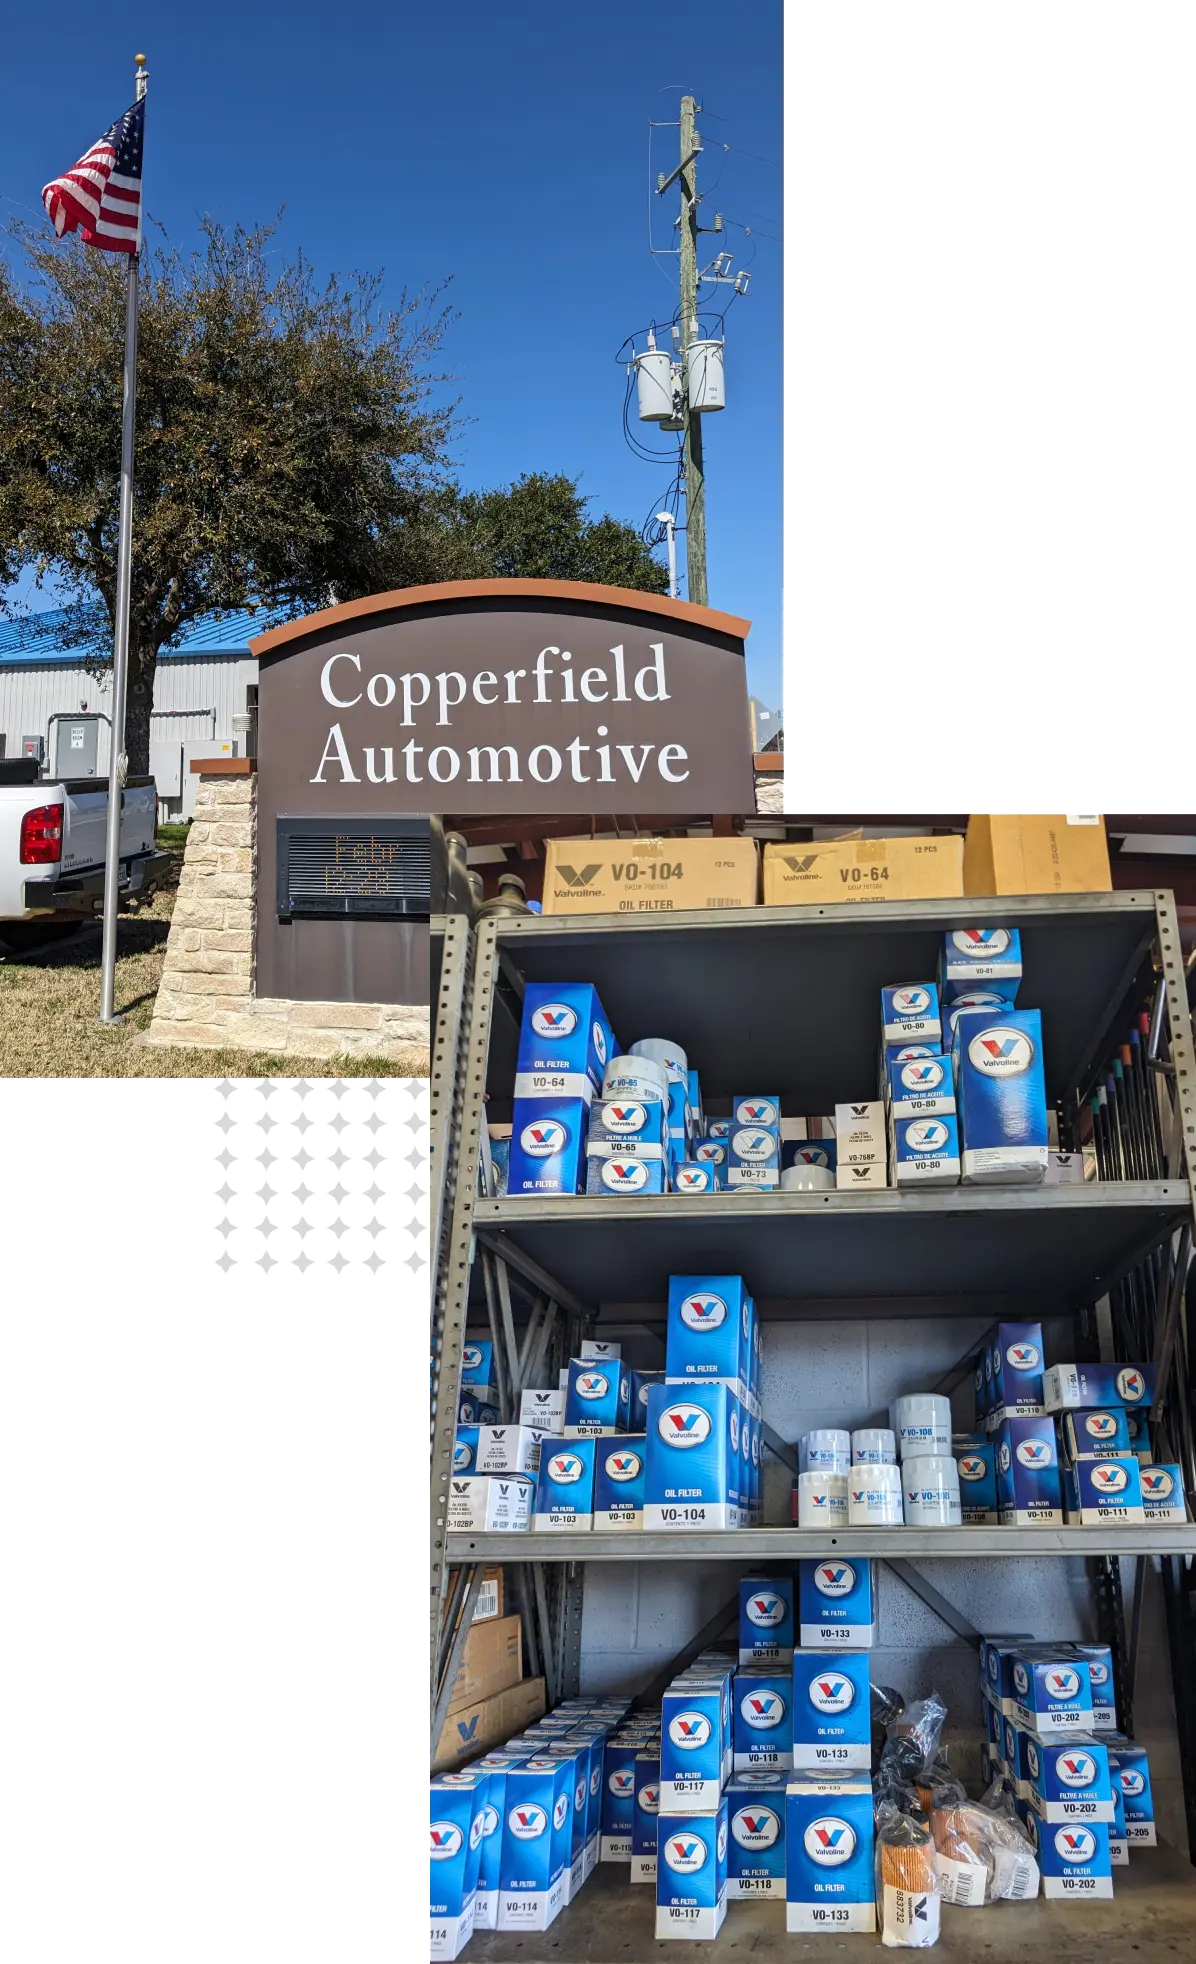 Copperfield Automotive sign and stocked oil filters.